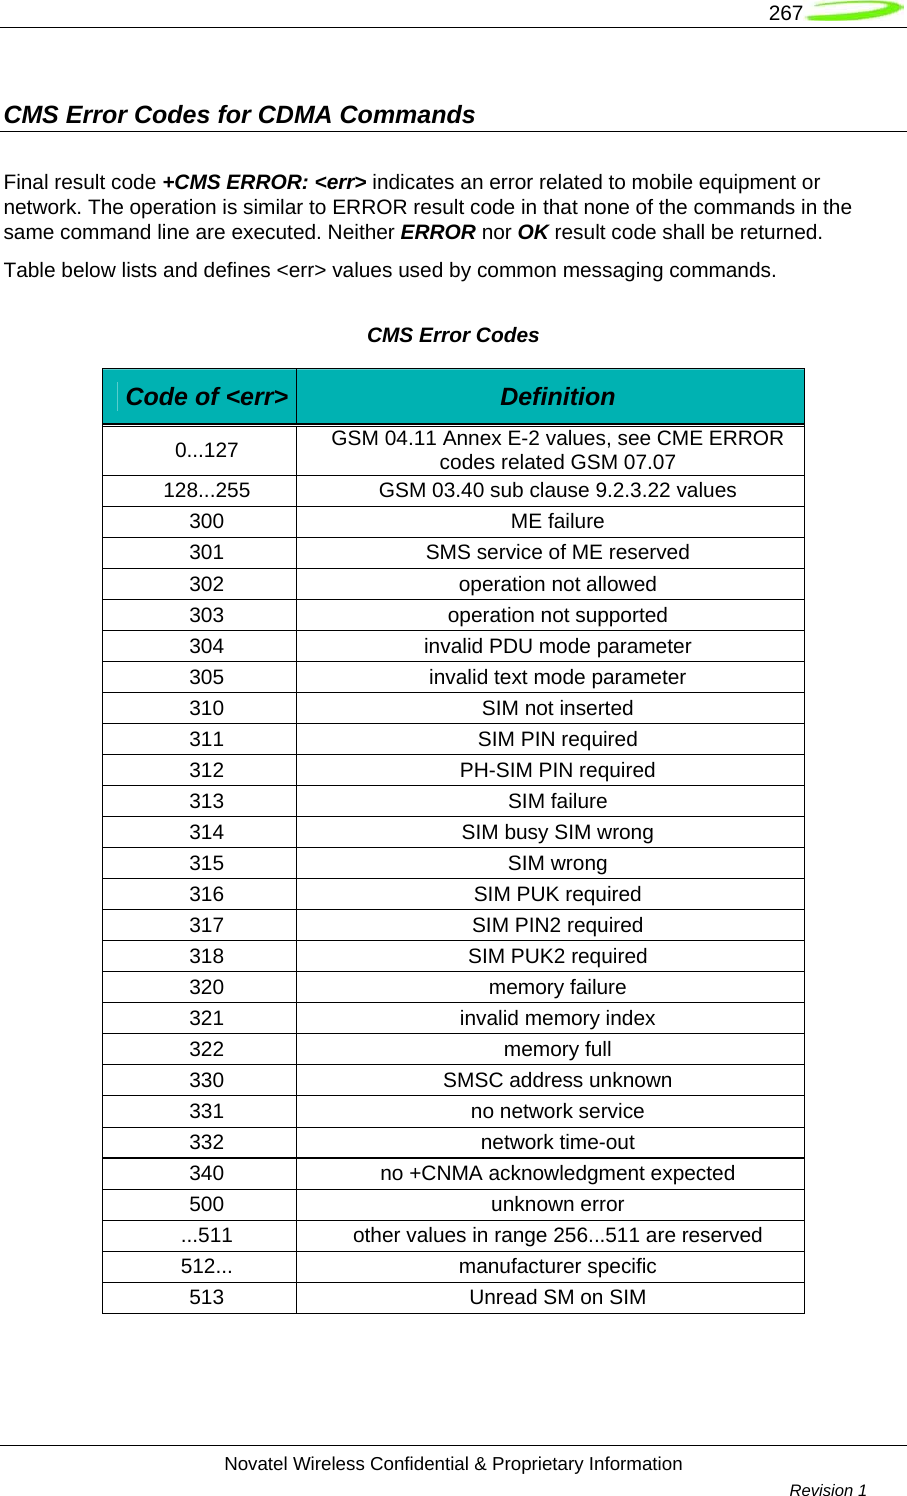   267  Novatel Wireless Confidential &amp; Proprietary Information        Revision 1   CMS Error Codes for CDMA Commands Final result code +CMS ERROR: &lt;err&gt; indicates an error related to mobile equipment or network. The operation is similar to ERROR result code in that none of the commands in the same command line are executed. Neither ERROR nor OK result code shall be returned.  Table below lists and defines &lt;err&gt; values used by common messaging commands. CMS Error Codes Code of &lt;err&gt;  Definition 0...127  GSM 04.11 Annex E-2 values, see CME ERROR codes related GSM 07.07 128...255  GSM 03.40 sub clause 9.2.3.22 values 300 ME failure 301  SMS service of ME reserved 302 operation not allowed 303 operation not supported 304  invalid PDU mode parameter 305  invalid text mode parameter 310  SIM not inserted 311  SIM PIN required 312  PH-SIM PIN required 313 SIM failure 314  SIM busy SIM wrong 315 SIM wrong 316  SIM PUK required 317  SIM PIN2 required 318  SIM PUK2 required 320 memory failure 321  invalid memory index 322 memory full 330  SMSC address unknown 331  no network service 332 network time-out 340  no +CNMA acknowledgment expected 500 unknown error ...511  other values in range 256...511 are reserved 512... manufacturer specific 513  Unread SM on SIM   